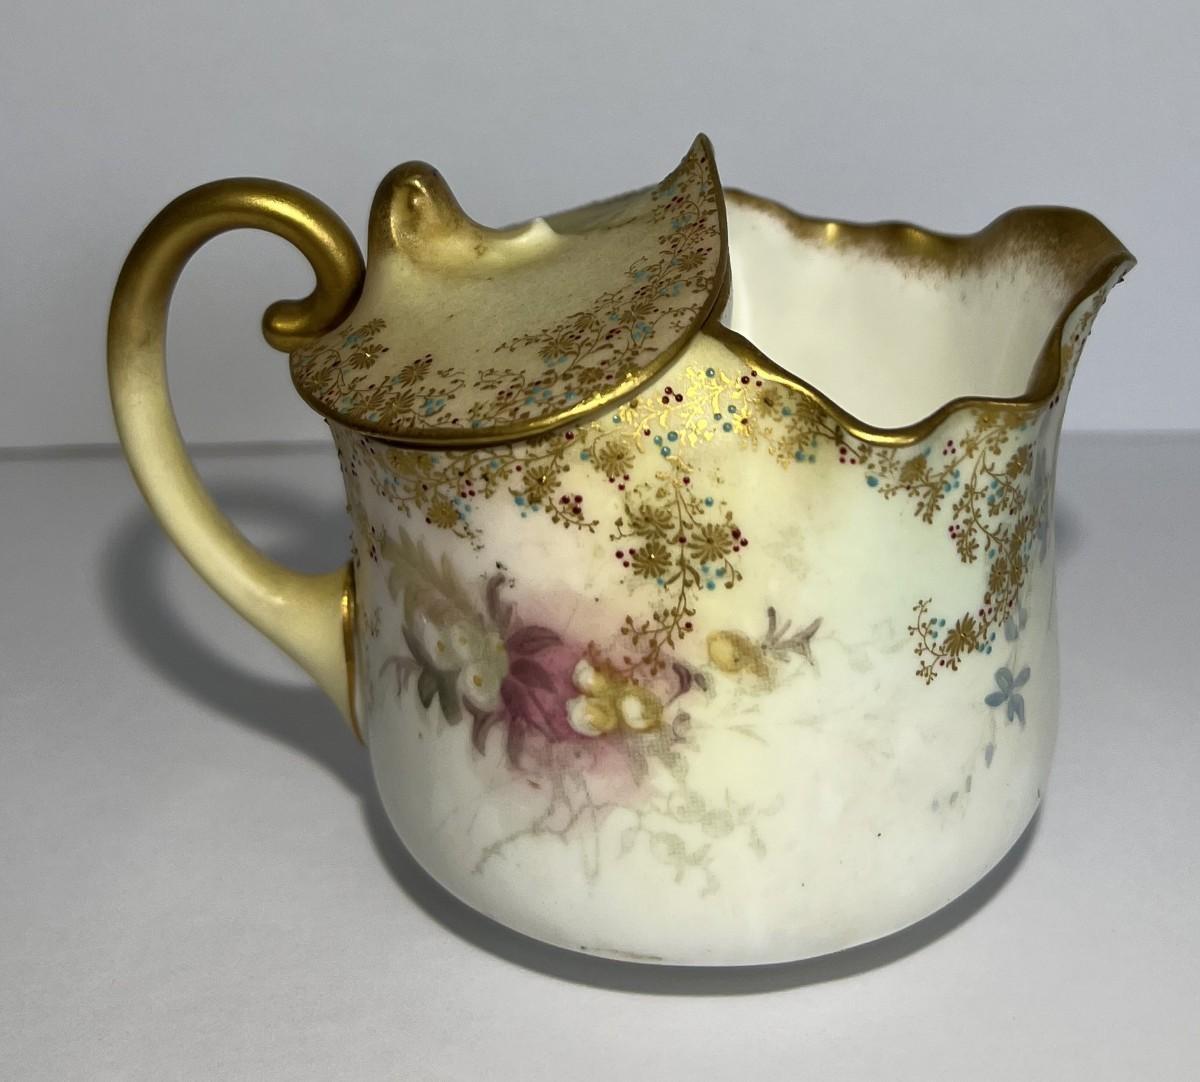 Photo 1 of Antique Doulton Burslem England Sugar & Creamer Cup 3-1/4" in Good Preowned Cond